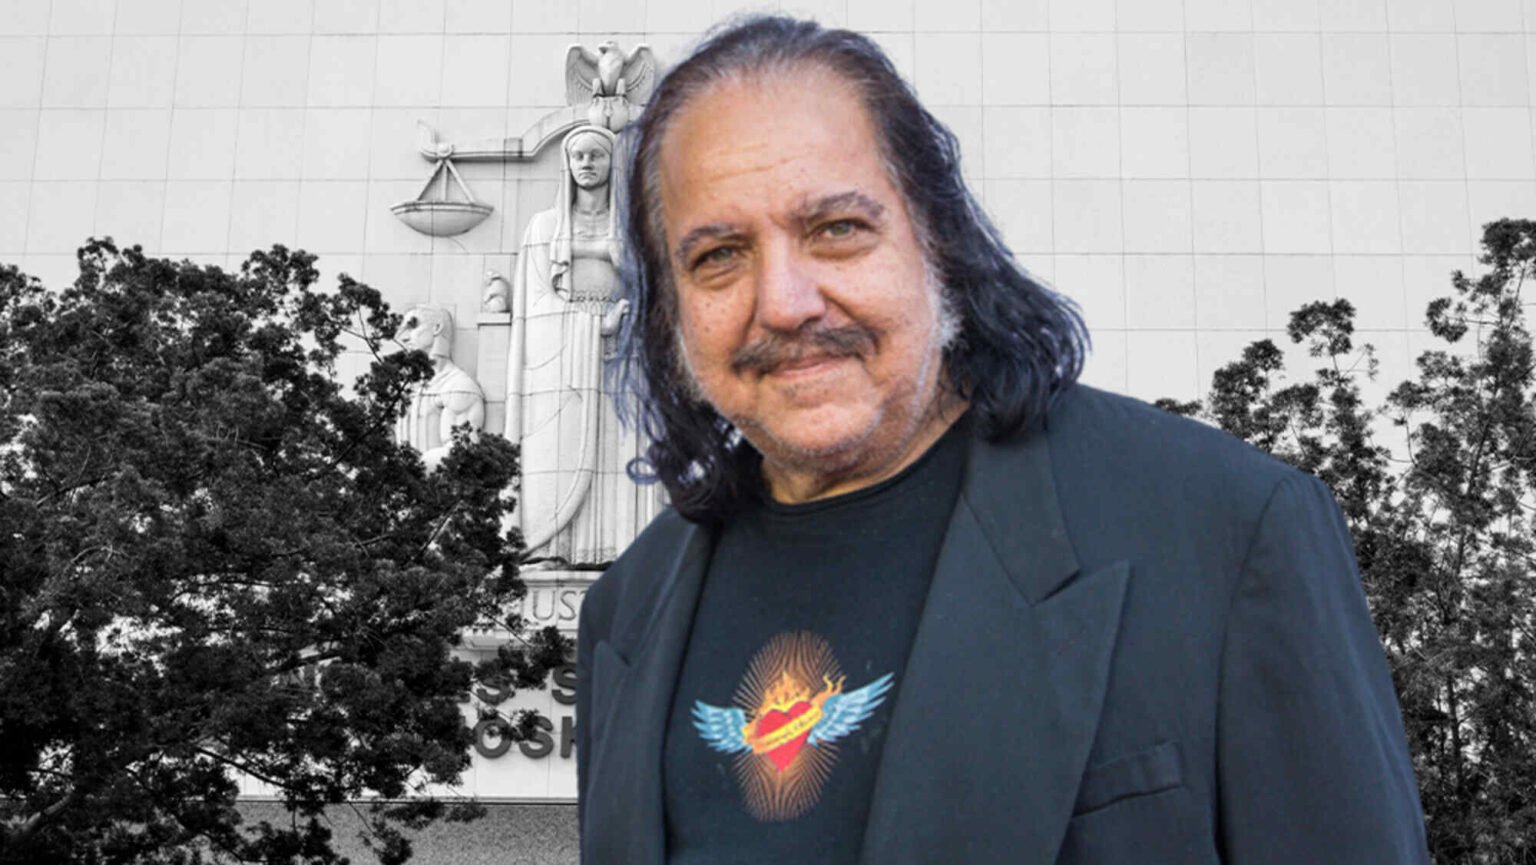 You've heard the stories about Ron Jeremy and his penis, but reality is a lot more disturbing. Learn all about the accusations against the adult film star.